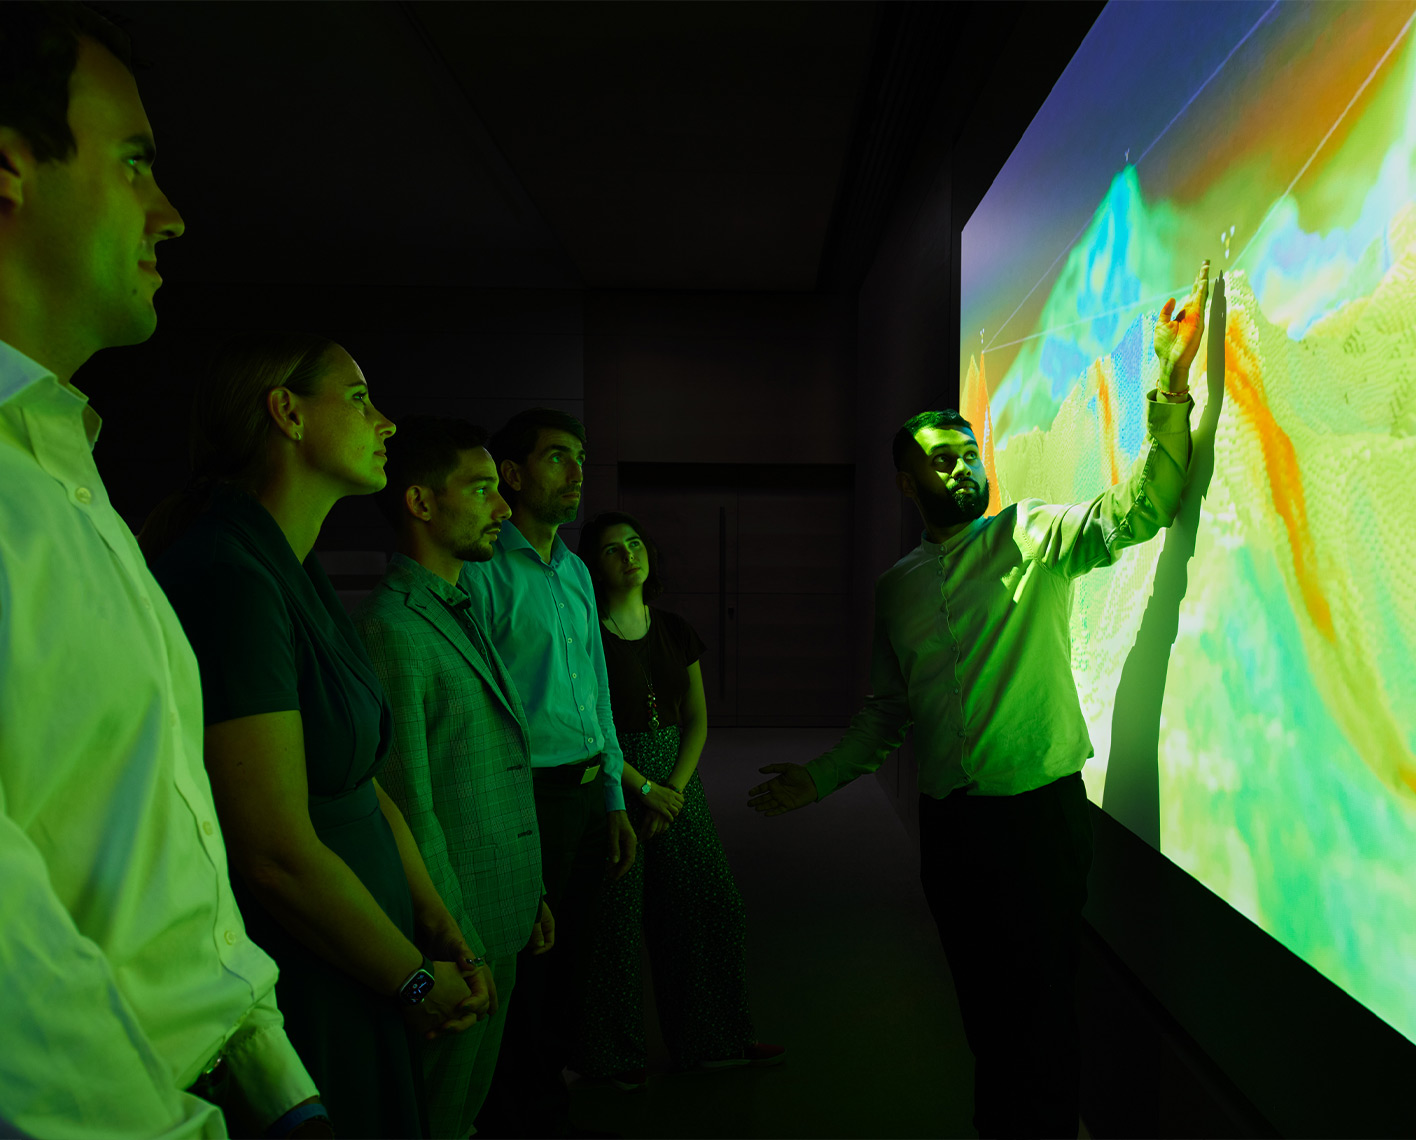 Group of people looking at a projection